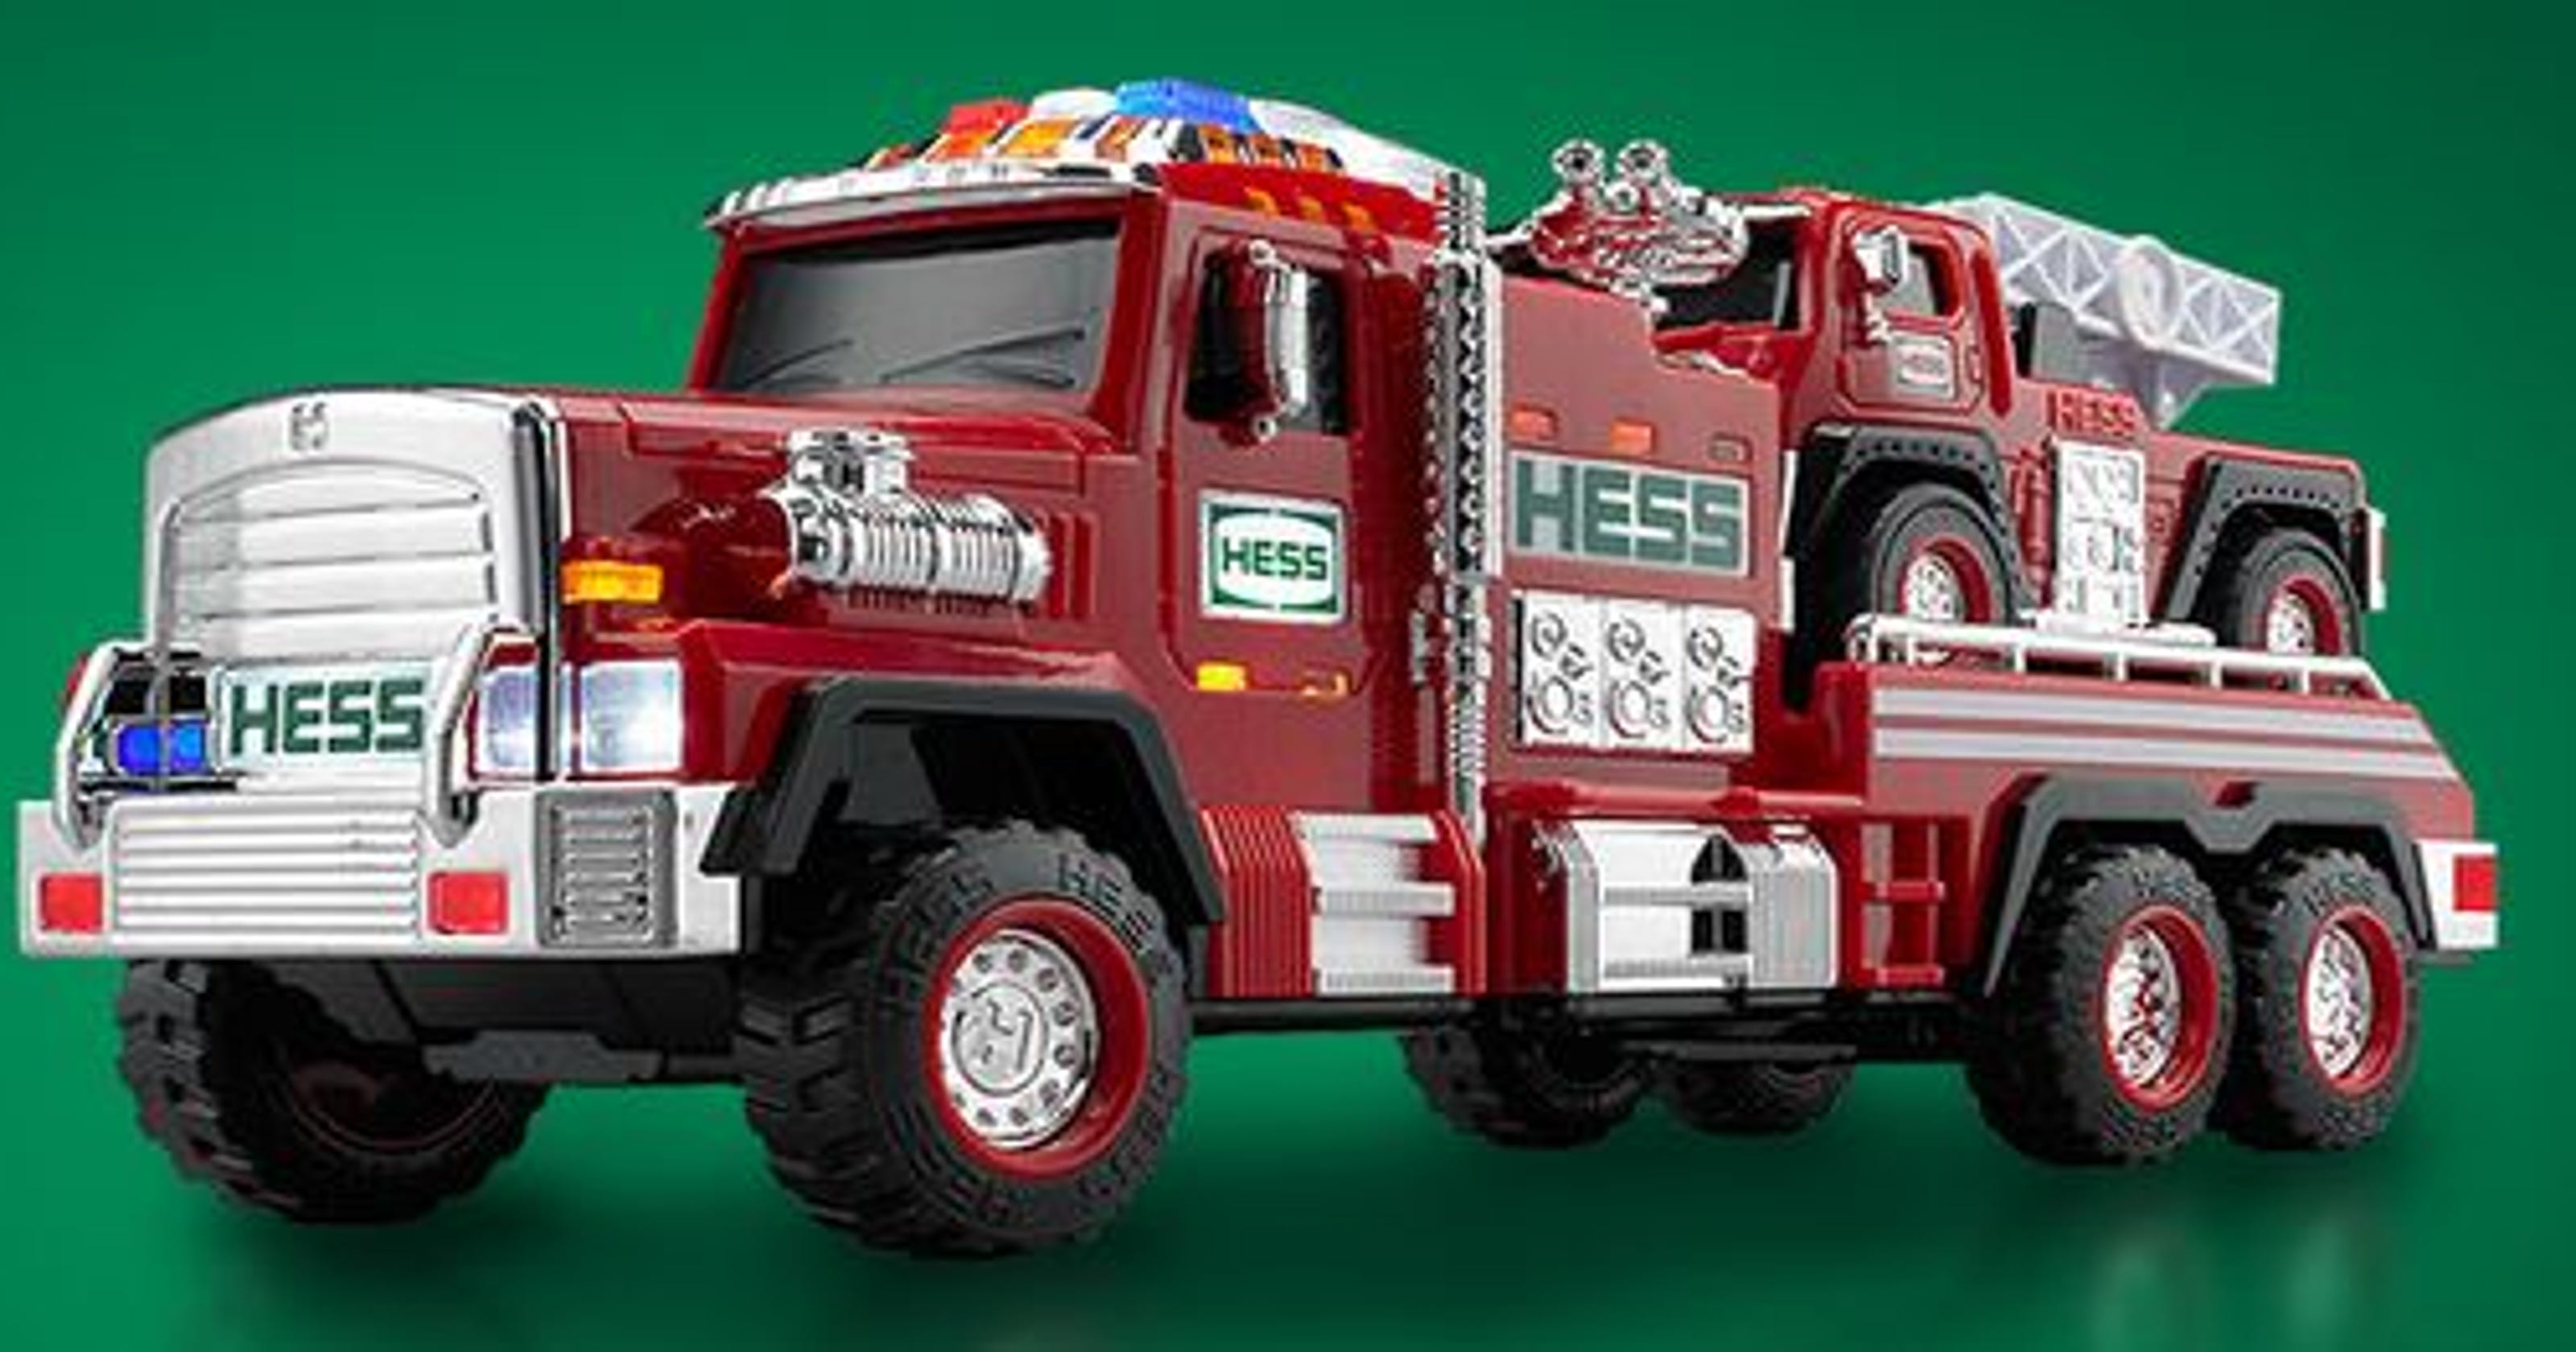 Annual Hess truck returns. See the new design!